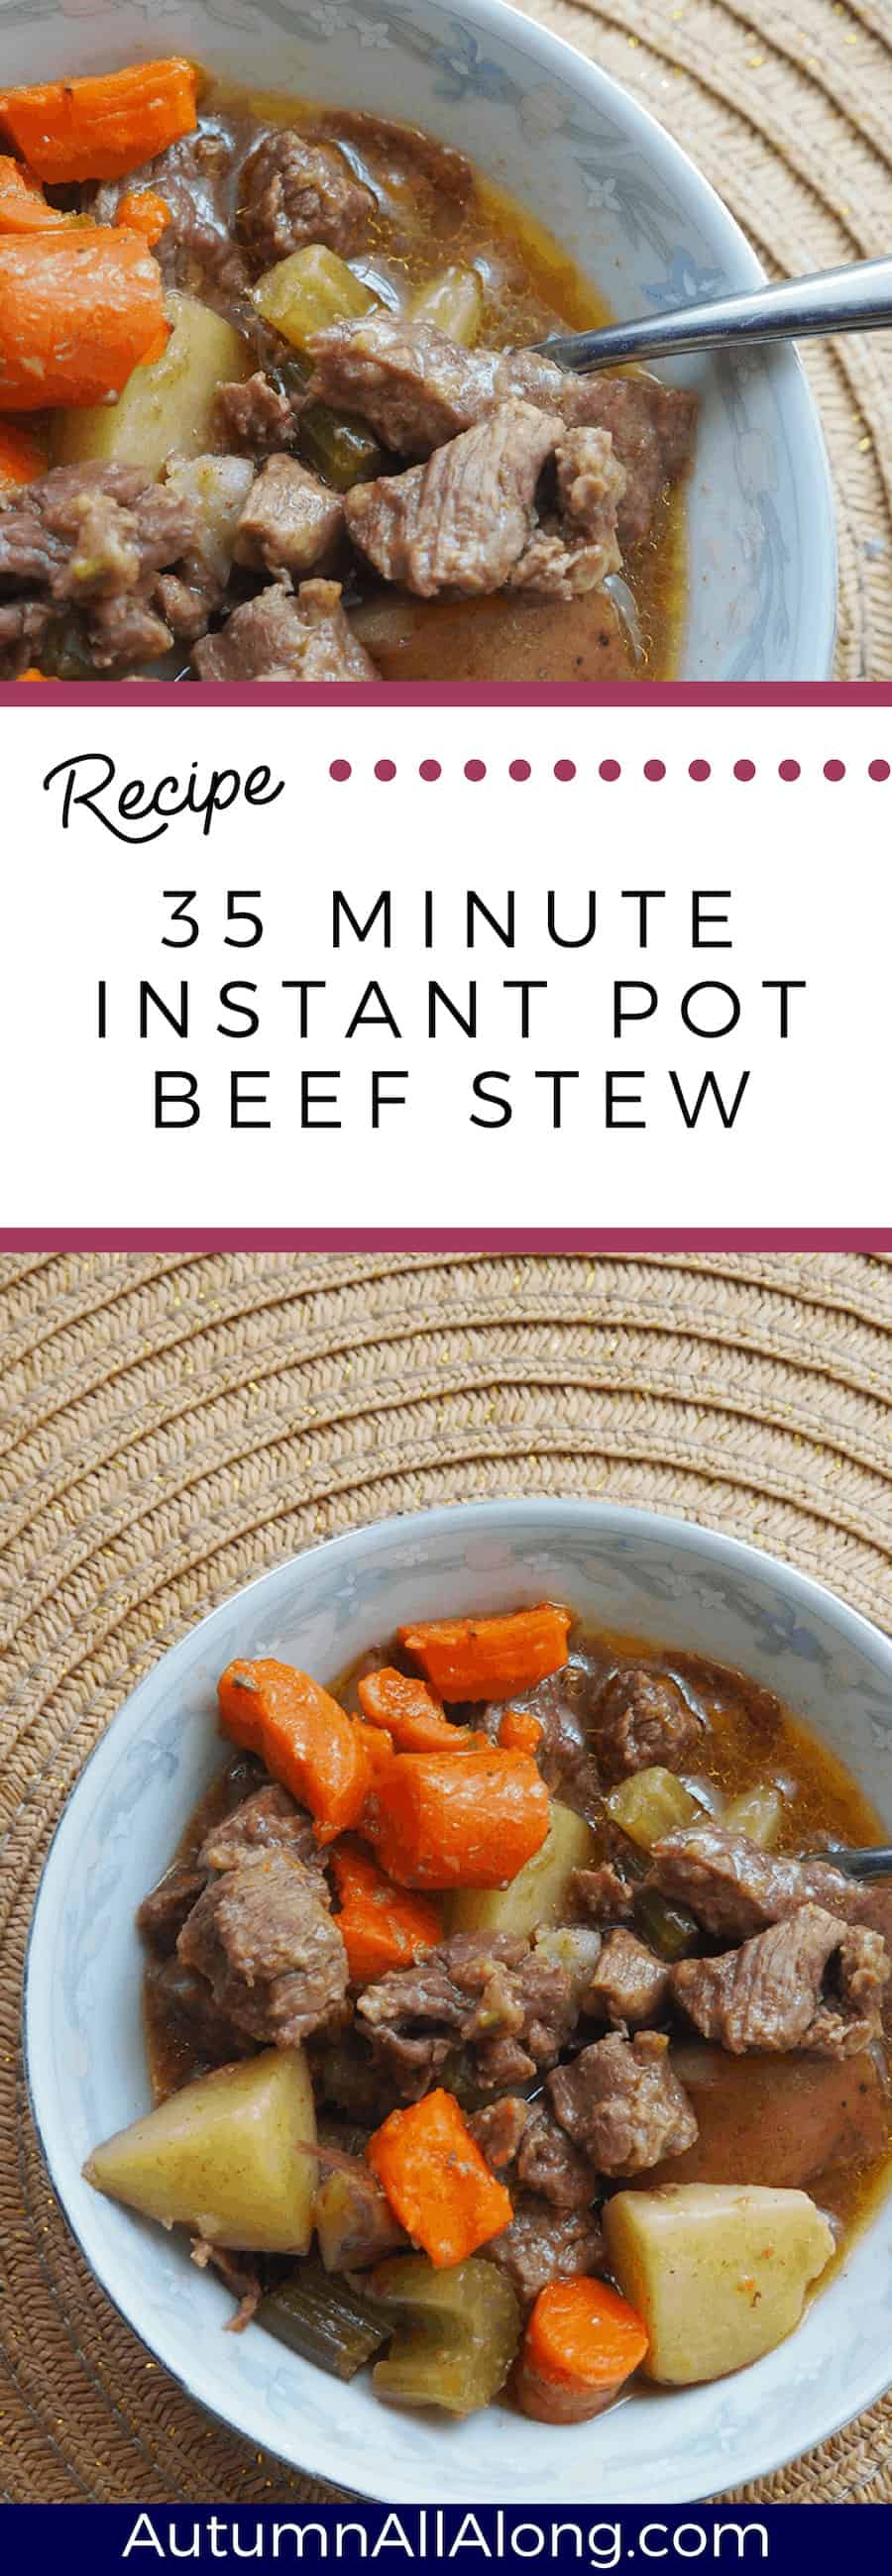 This 35 minute instant pot beef stew is delicious, easy, and a great replacement for your 4-6 hour slow cooker recipe! | via Autumn All Along